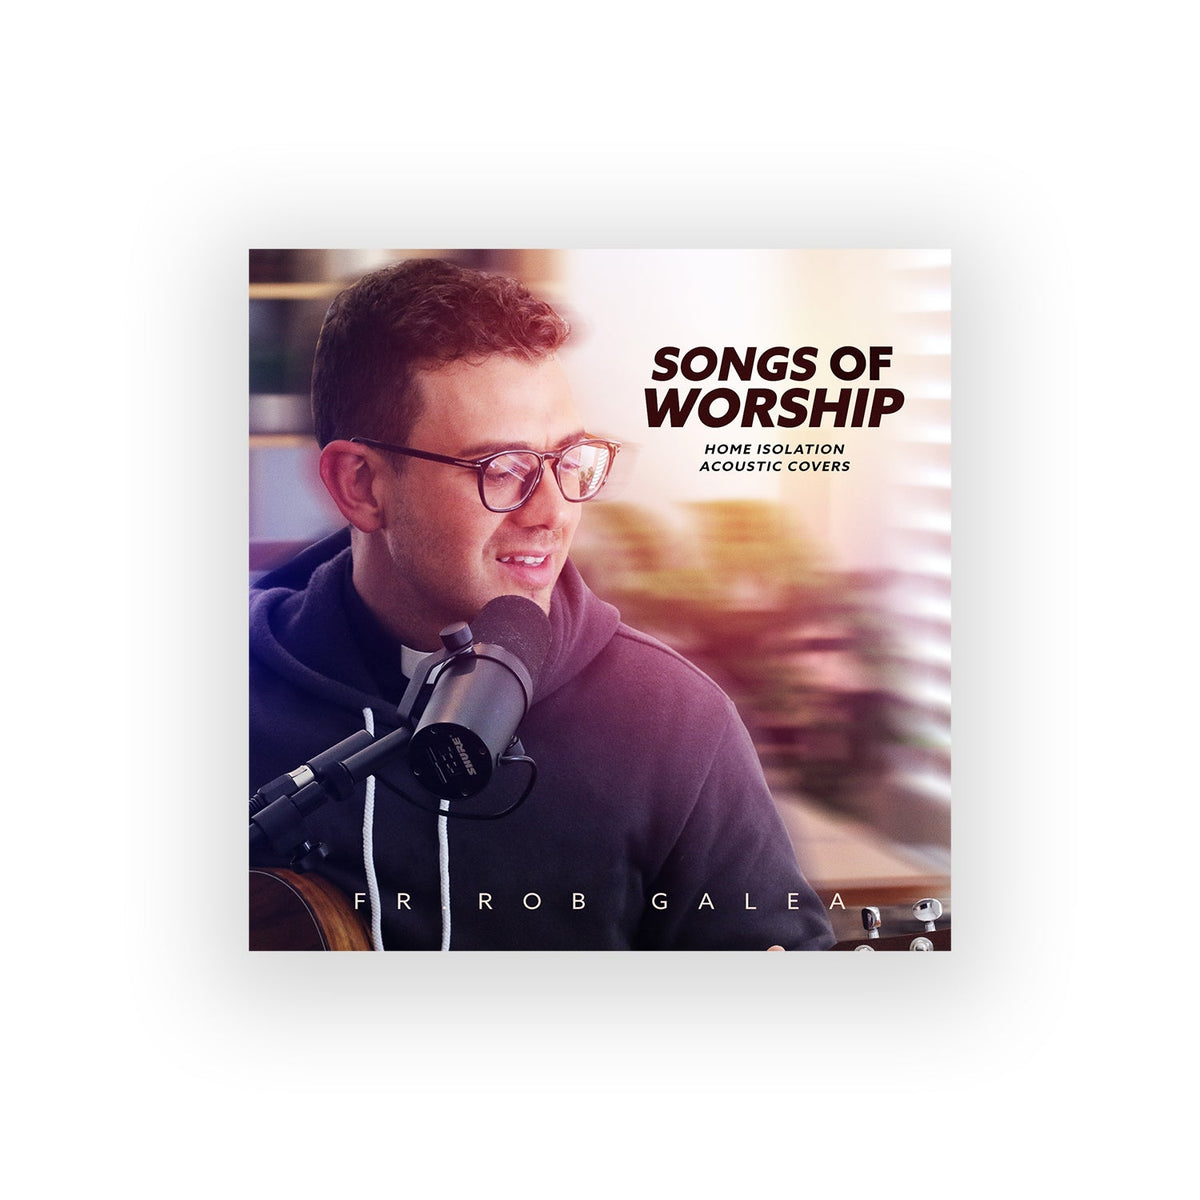 Songs of Worship - Home Isolation Acoustic Covers CD - Modern Grace